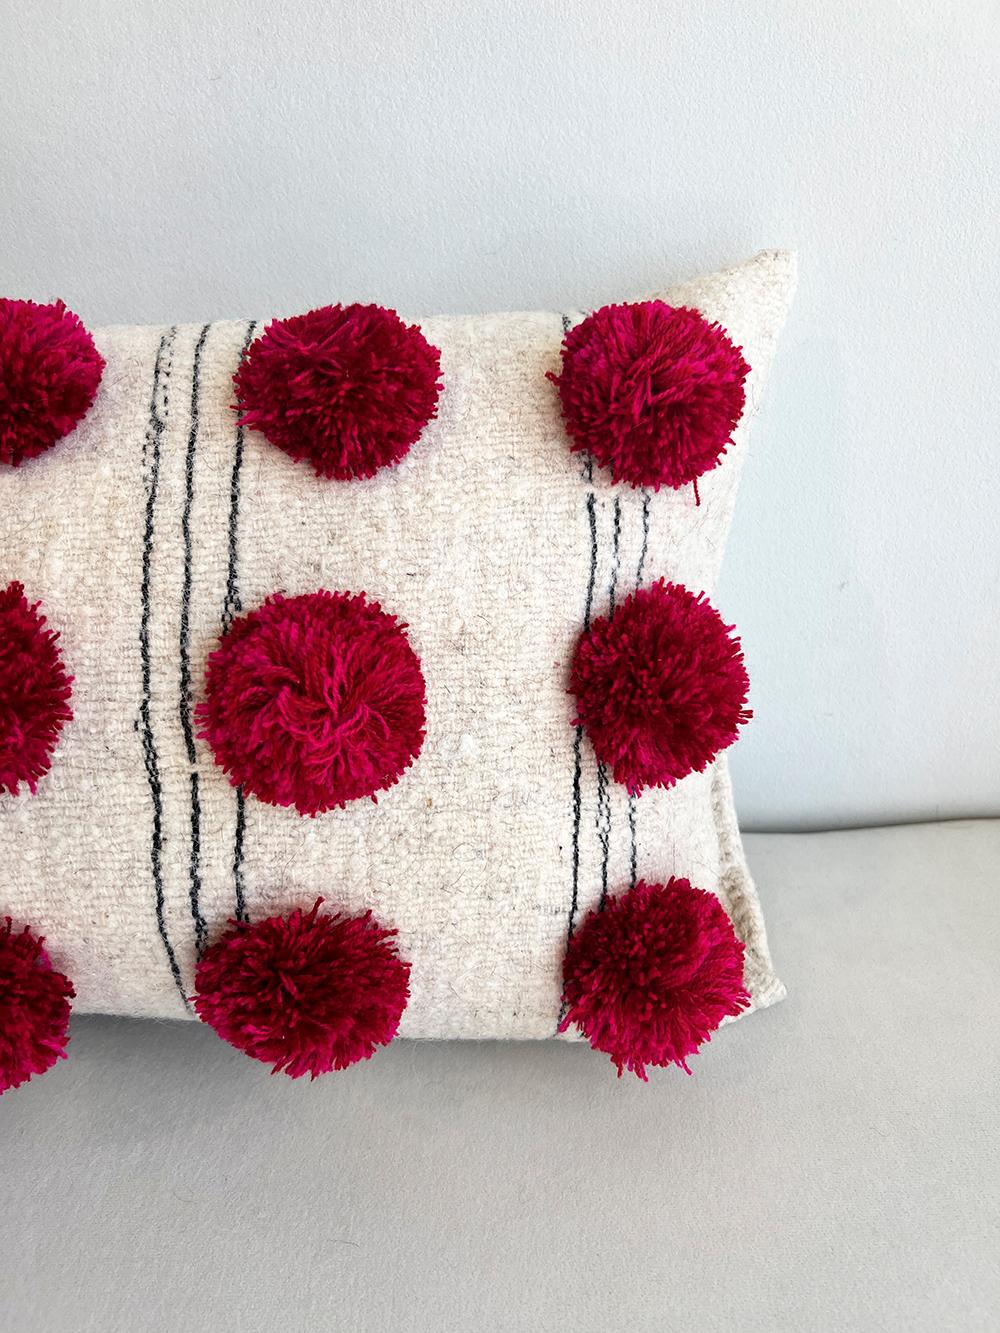 Mexican Chamula White with Gray Stripes Red Pom Pom Throw Pillow Handmade from 100% Wool For Sale